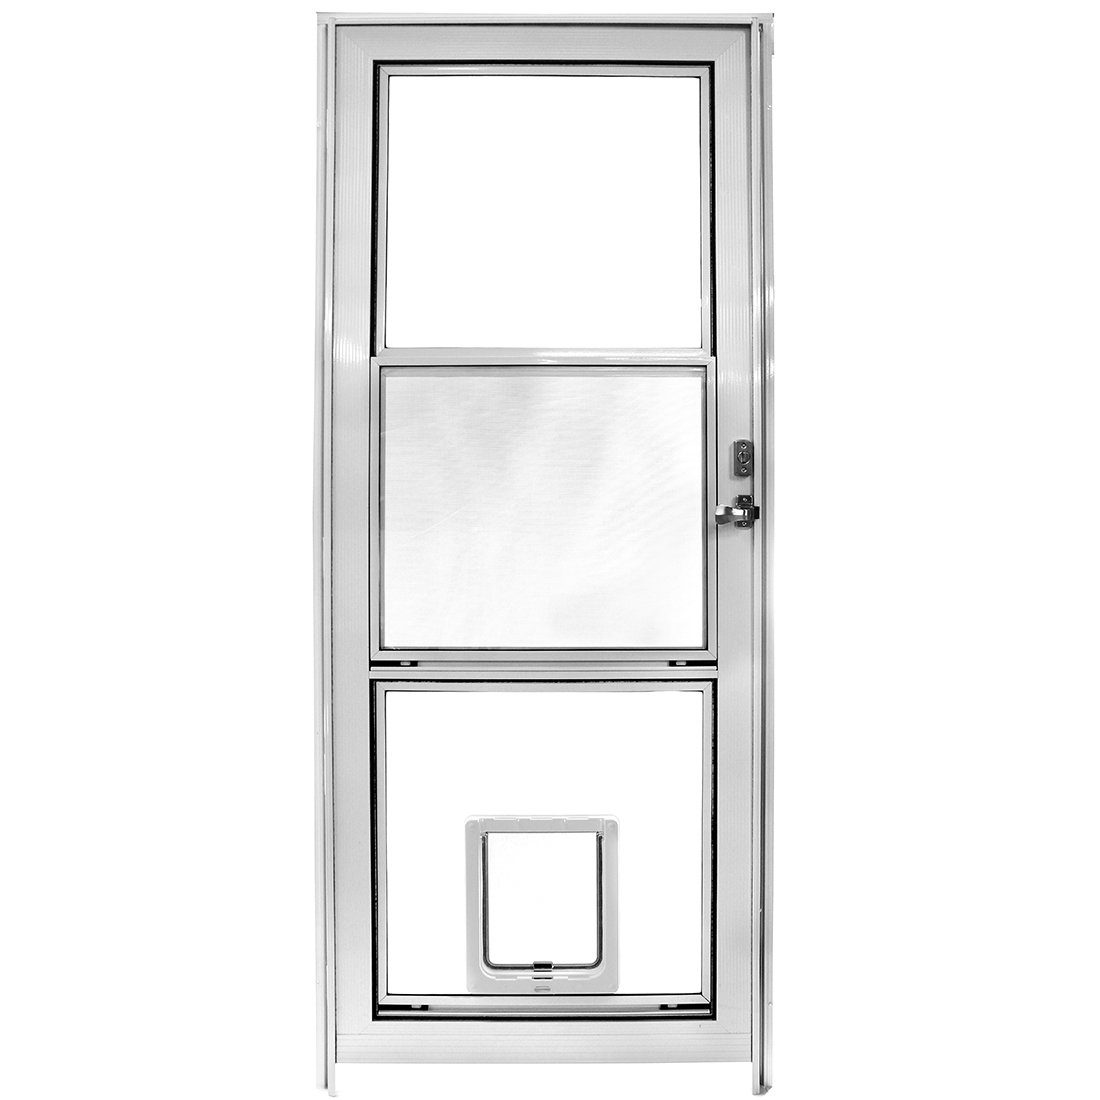 Glass Vent Storm Door With Dogmate Pet Door Installed intended for size 1100 X 1100